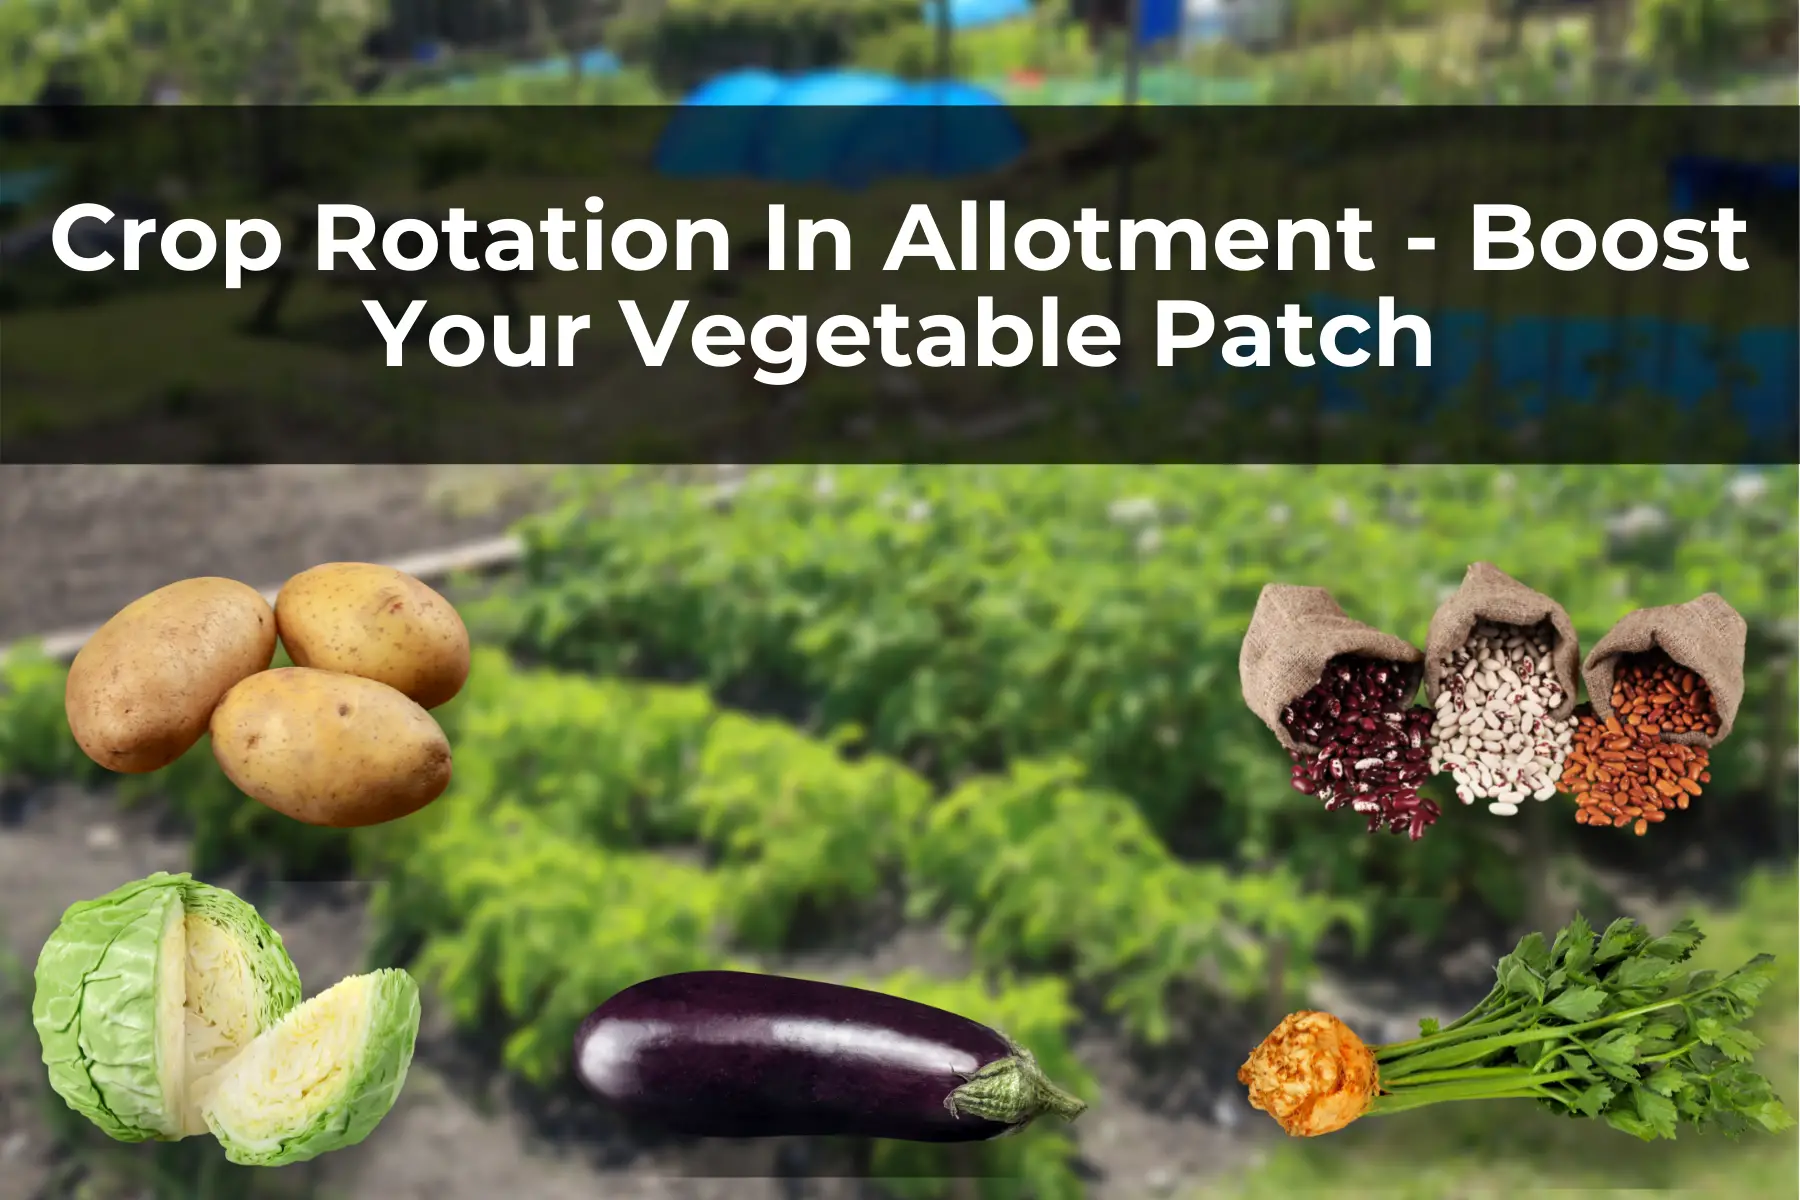 Crop Rotation In Allotment - Boost Your Vegetable Patch